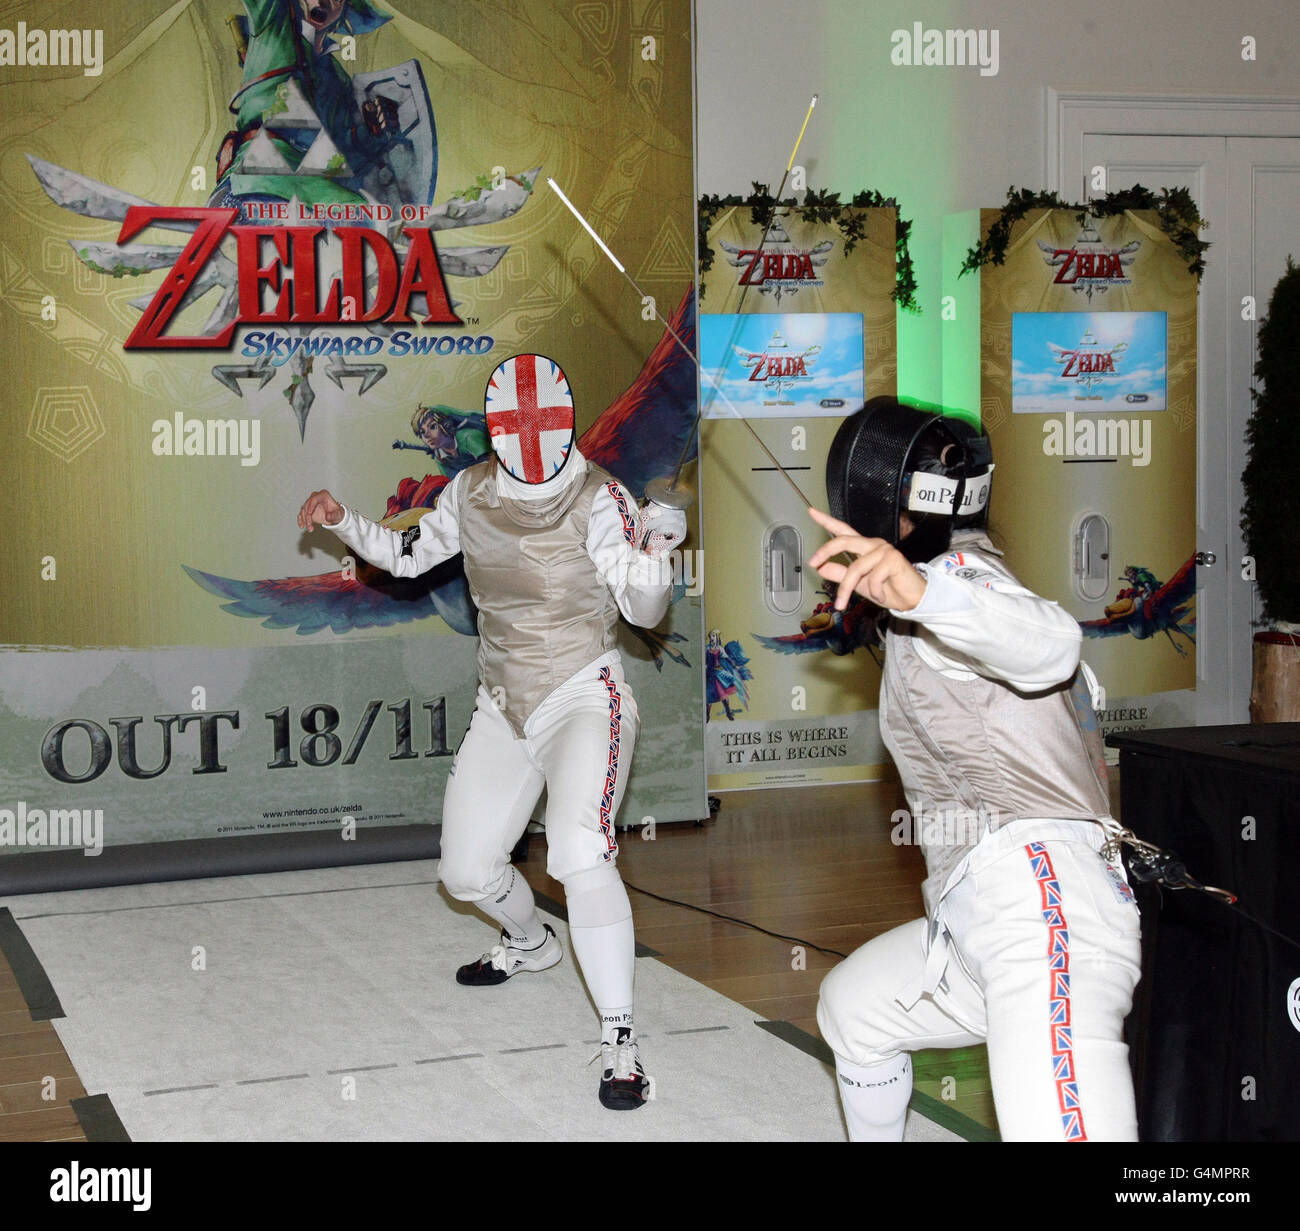 Claire Bennett (left) and Liz Ng of the Senior British Fencing team spar  against each other at the launch of the new Legend of Zelda Skyward Sword  video game for the Nintendo